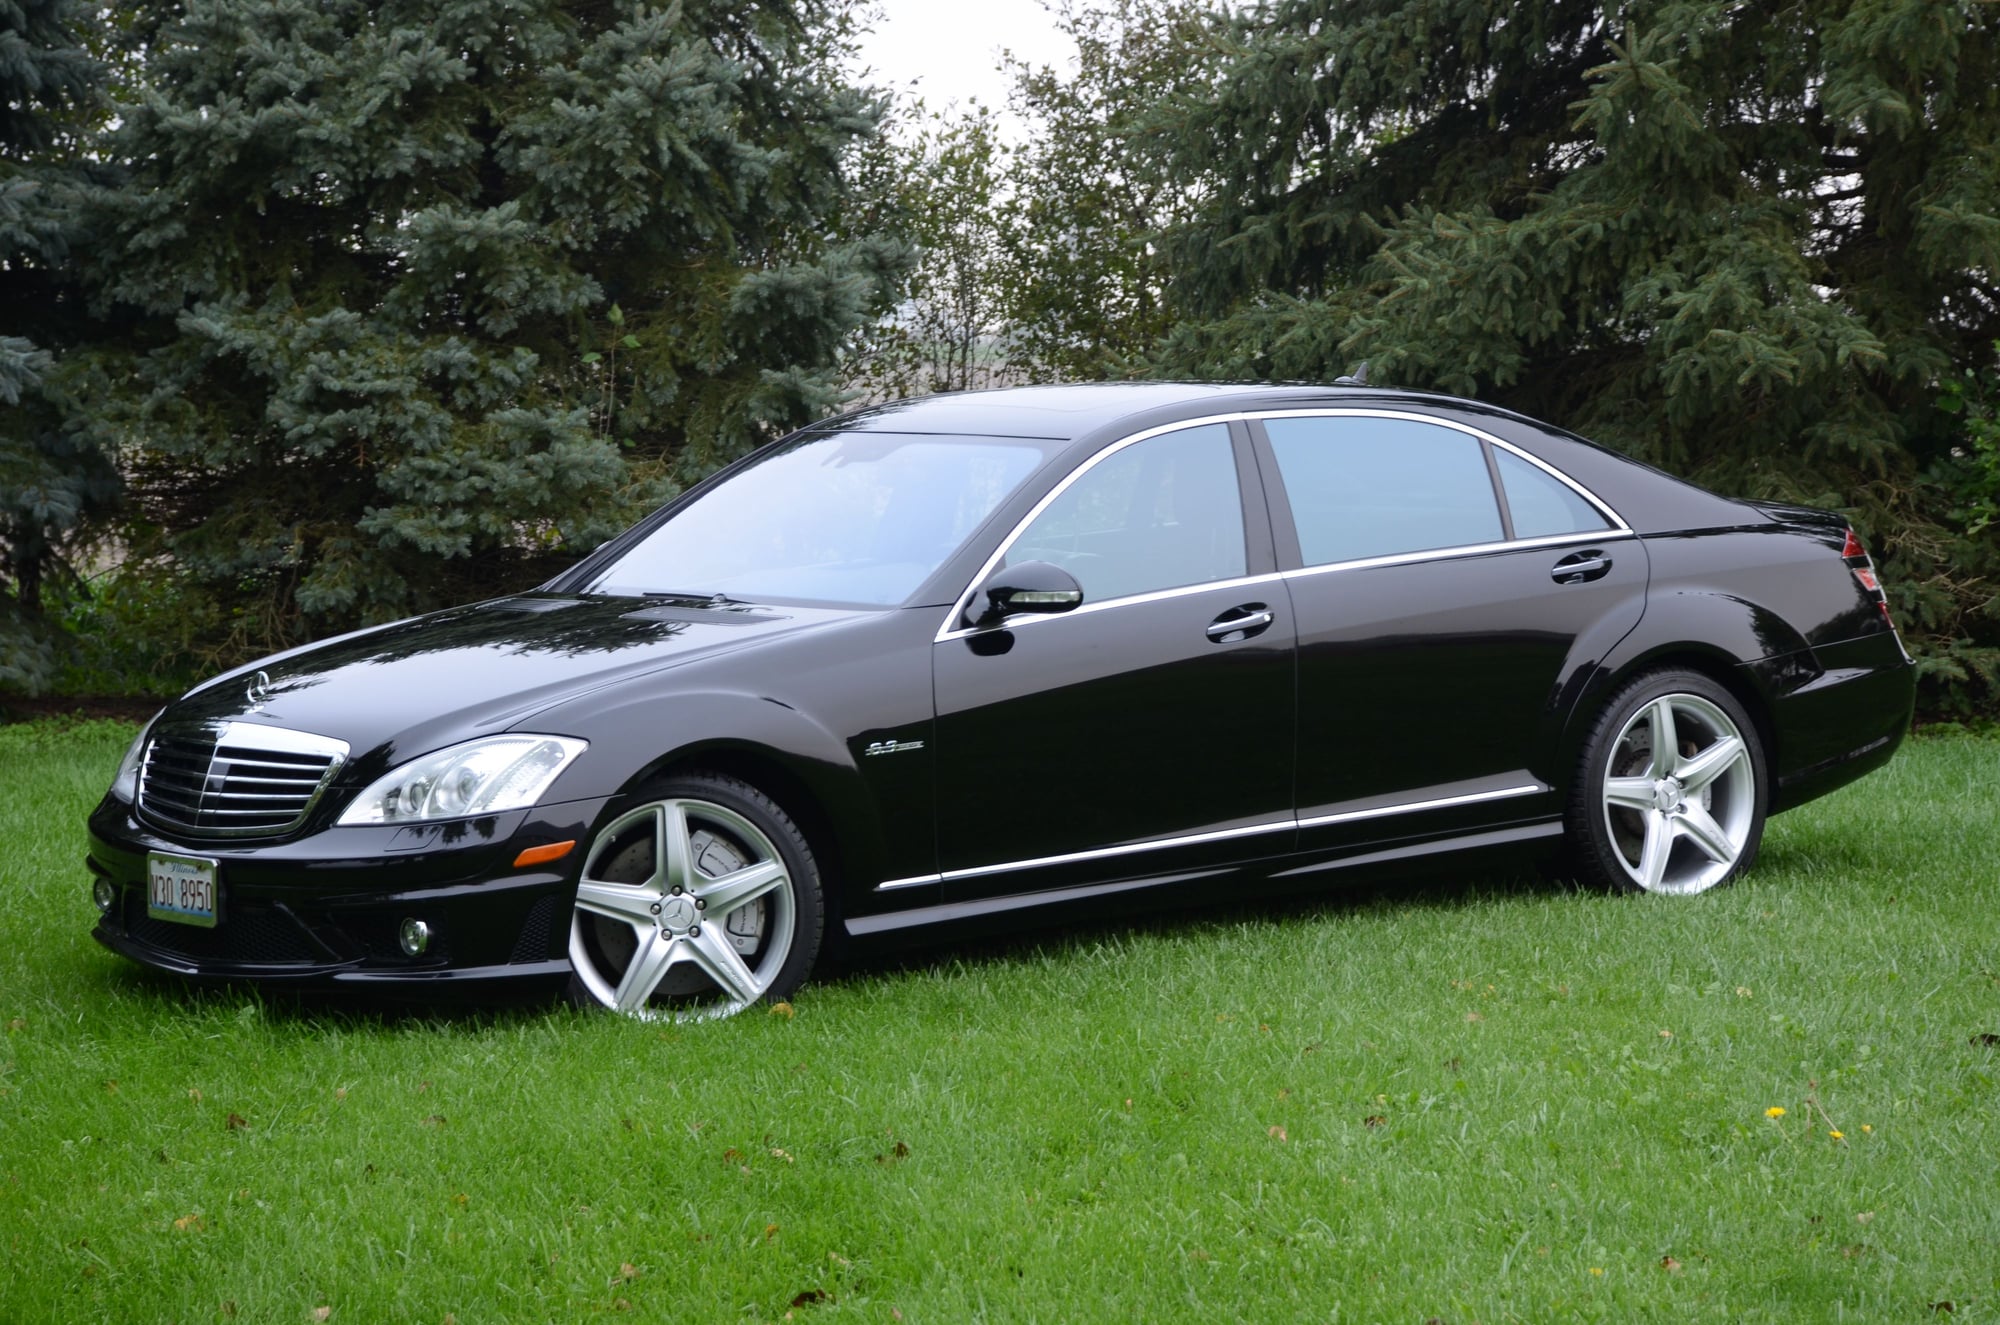 2008 Mercedes-Benz S63 AMG - 2008 Mercedes S63 2nd- Owner W221 All OEM Original - Used - VIN WDDNG77X48A154350 - 89,500 Miles - 8 cyl - 2WD - Automatic - Sedan - Black - South Chicagoland, IL 60935, United States